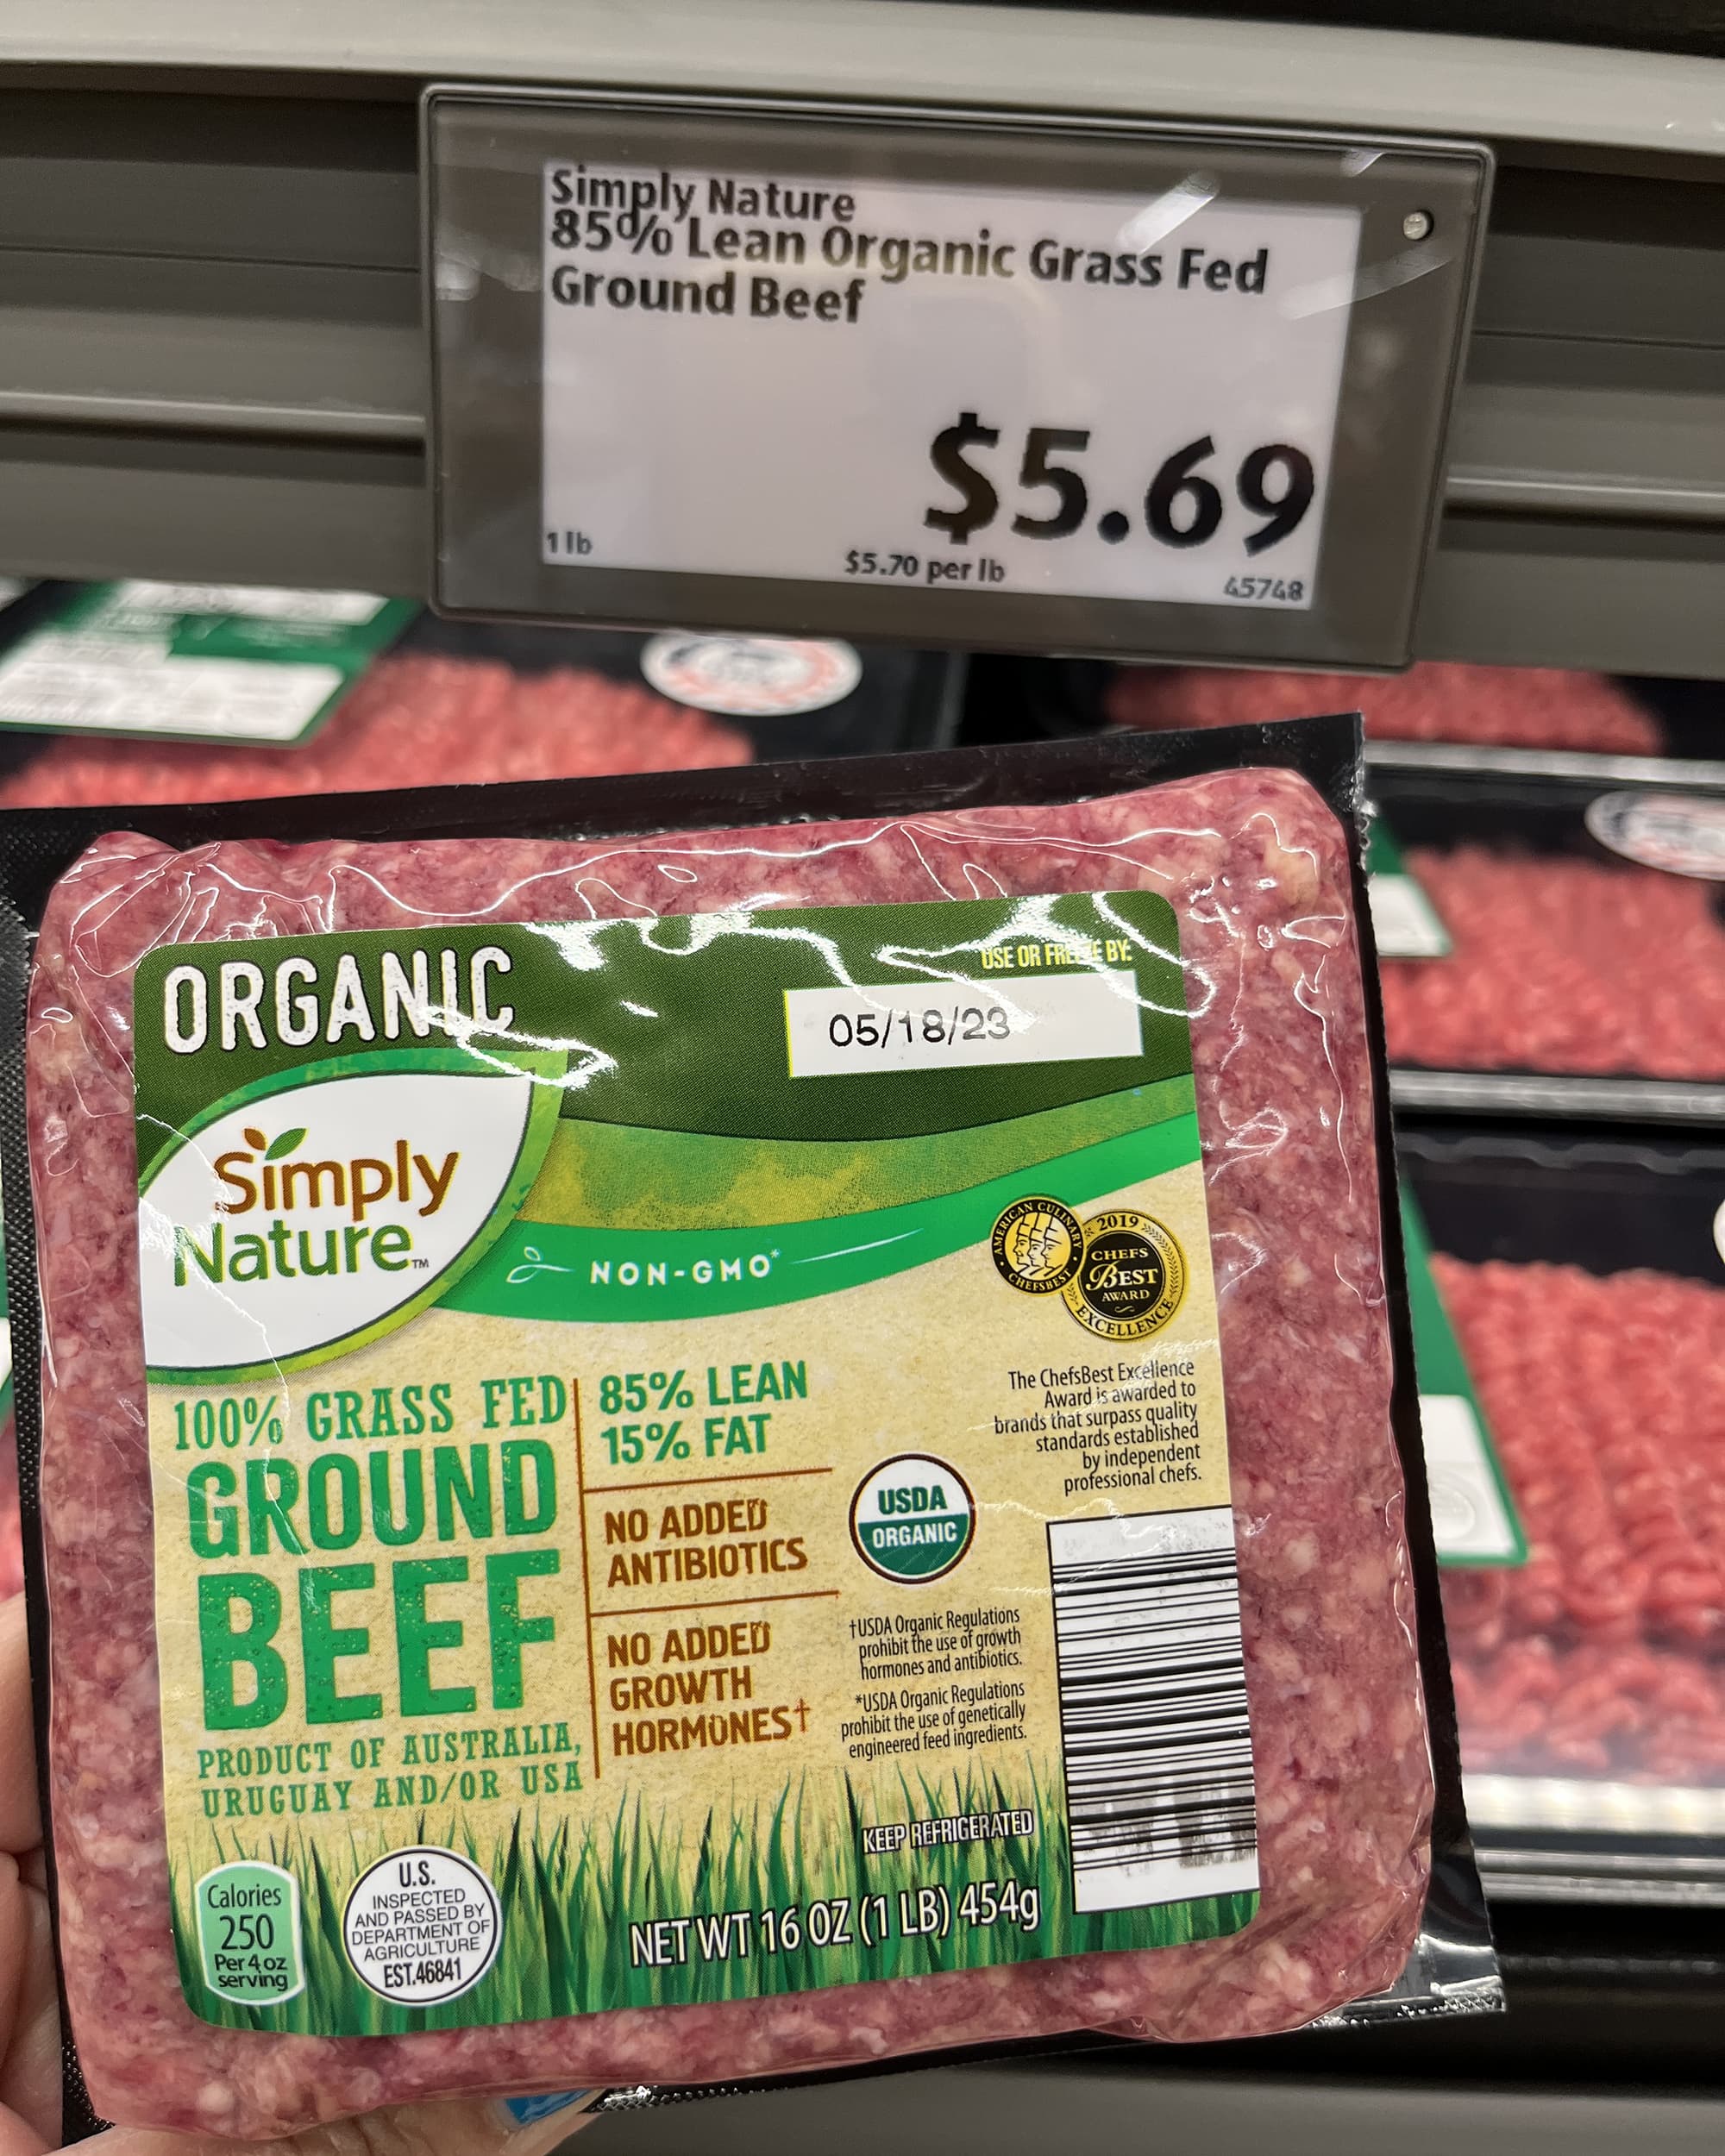 Aldi Simply Nature Organic 100% Grass Fed Ground Beef Review